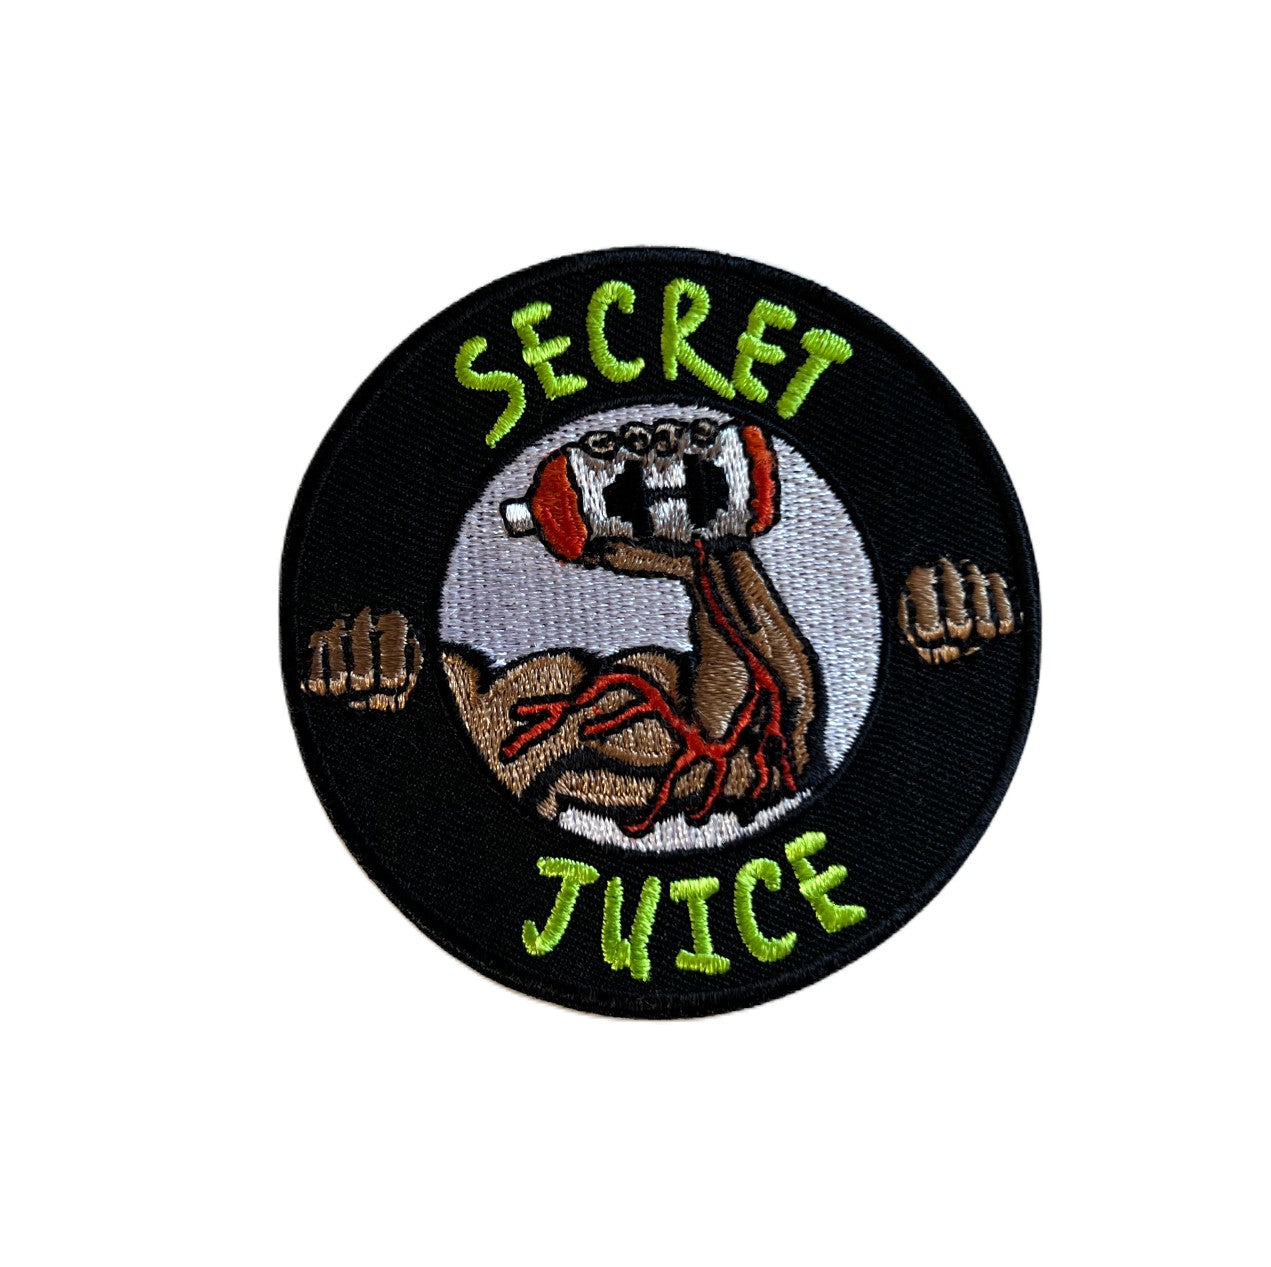 Paulo Costa Secret Juice Patch (3 Inch) Iron/Sew-on Badge UFC, Ultimate Fighting, Gym Training DIY Gift Patches